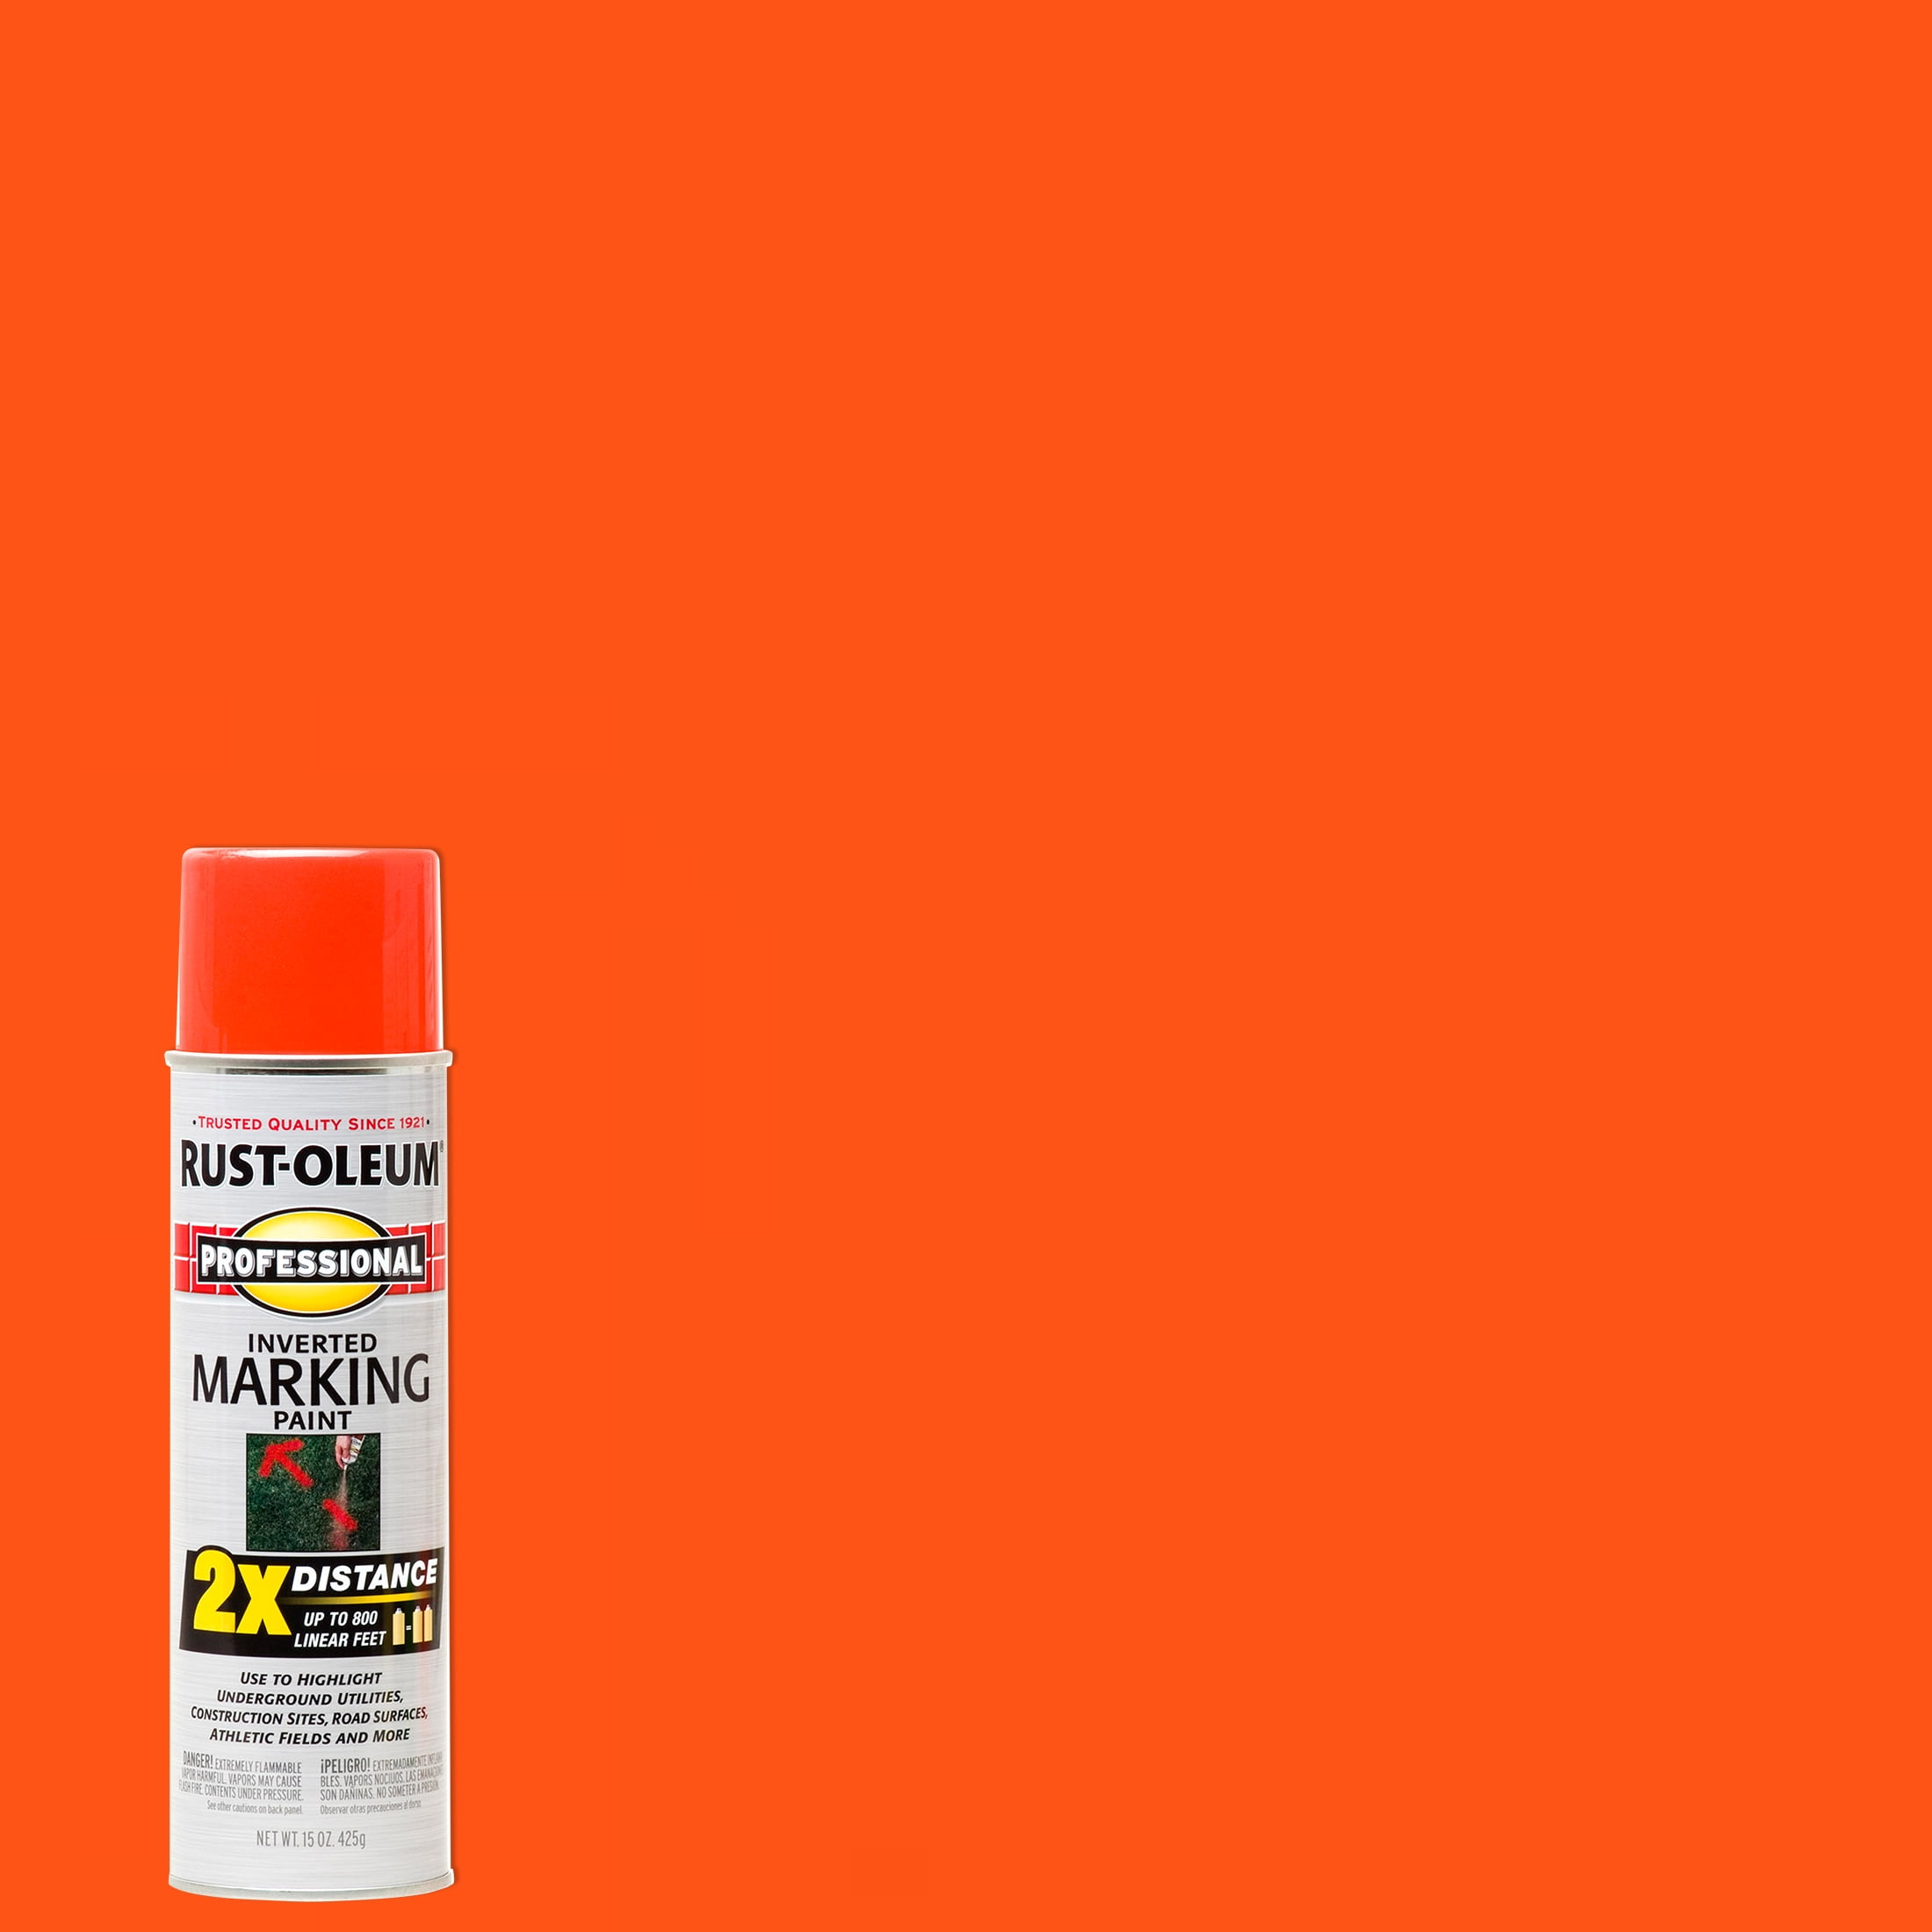 Shop Spray Paint for Marking From Top Brands